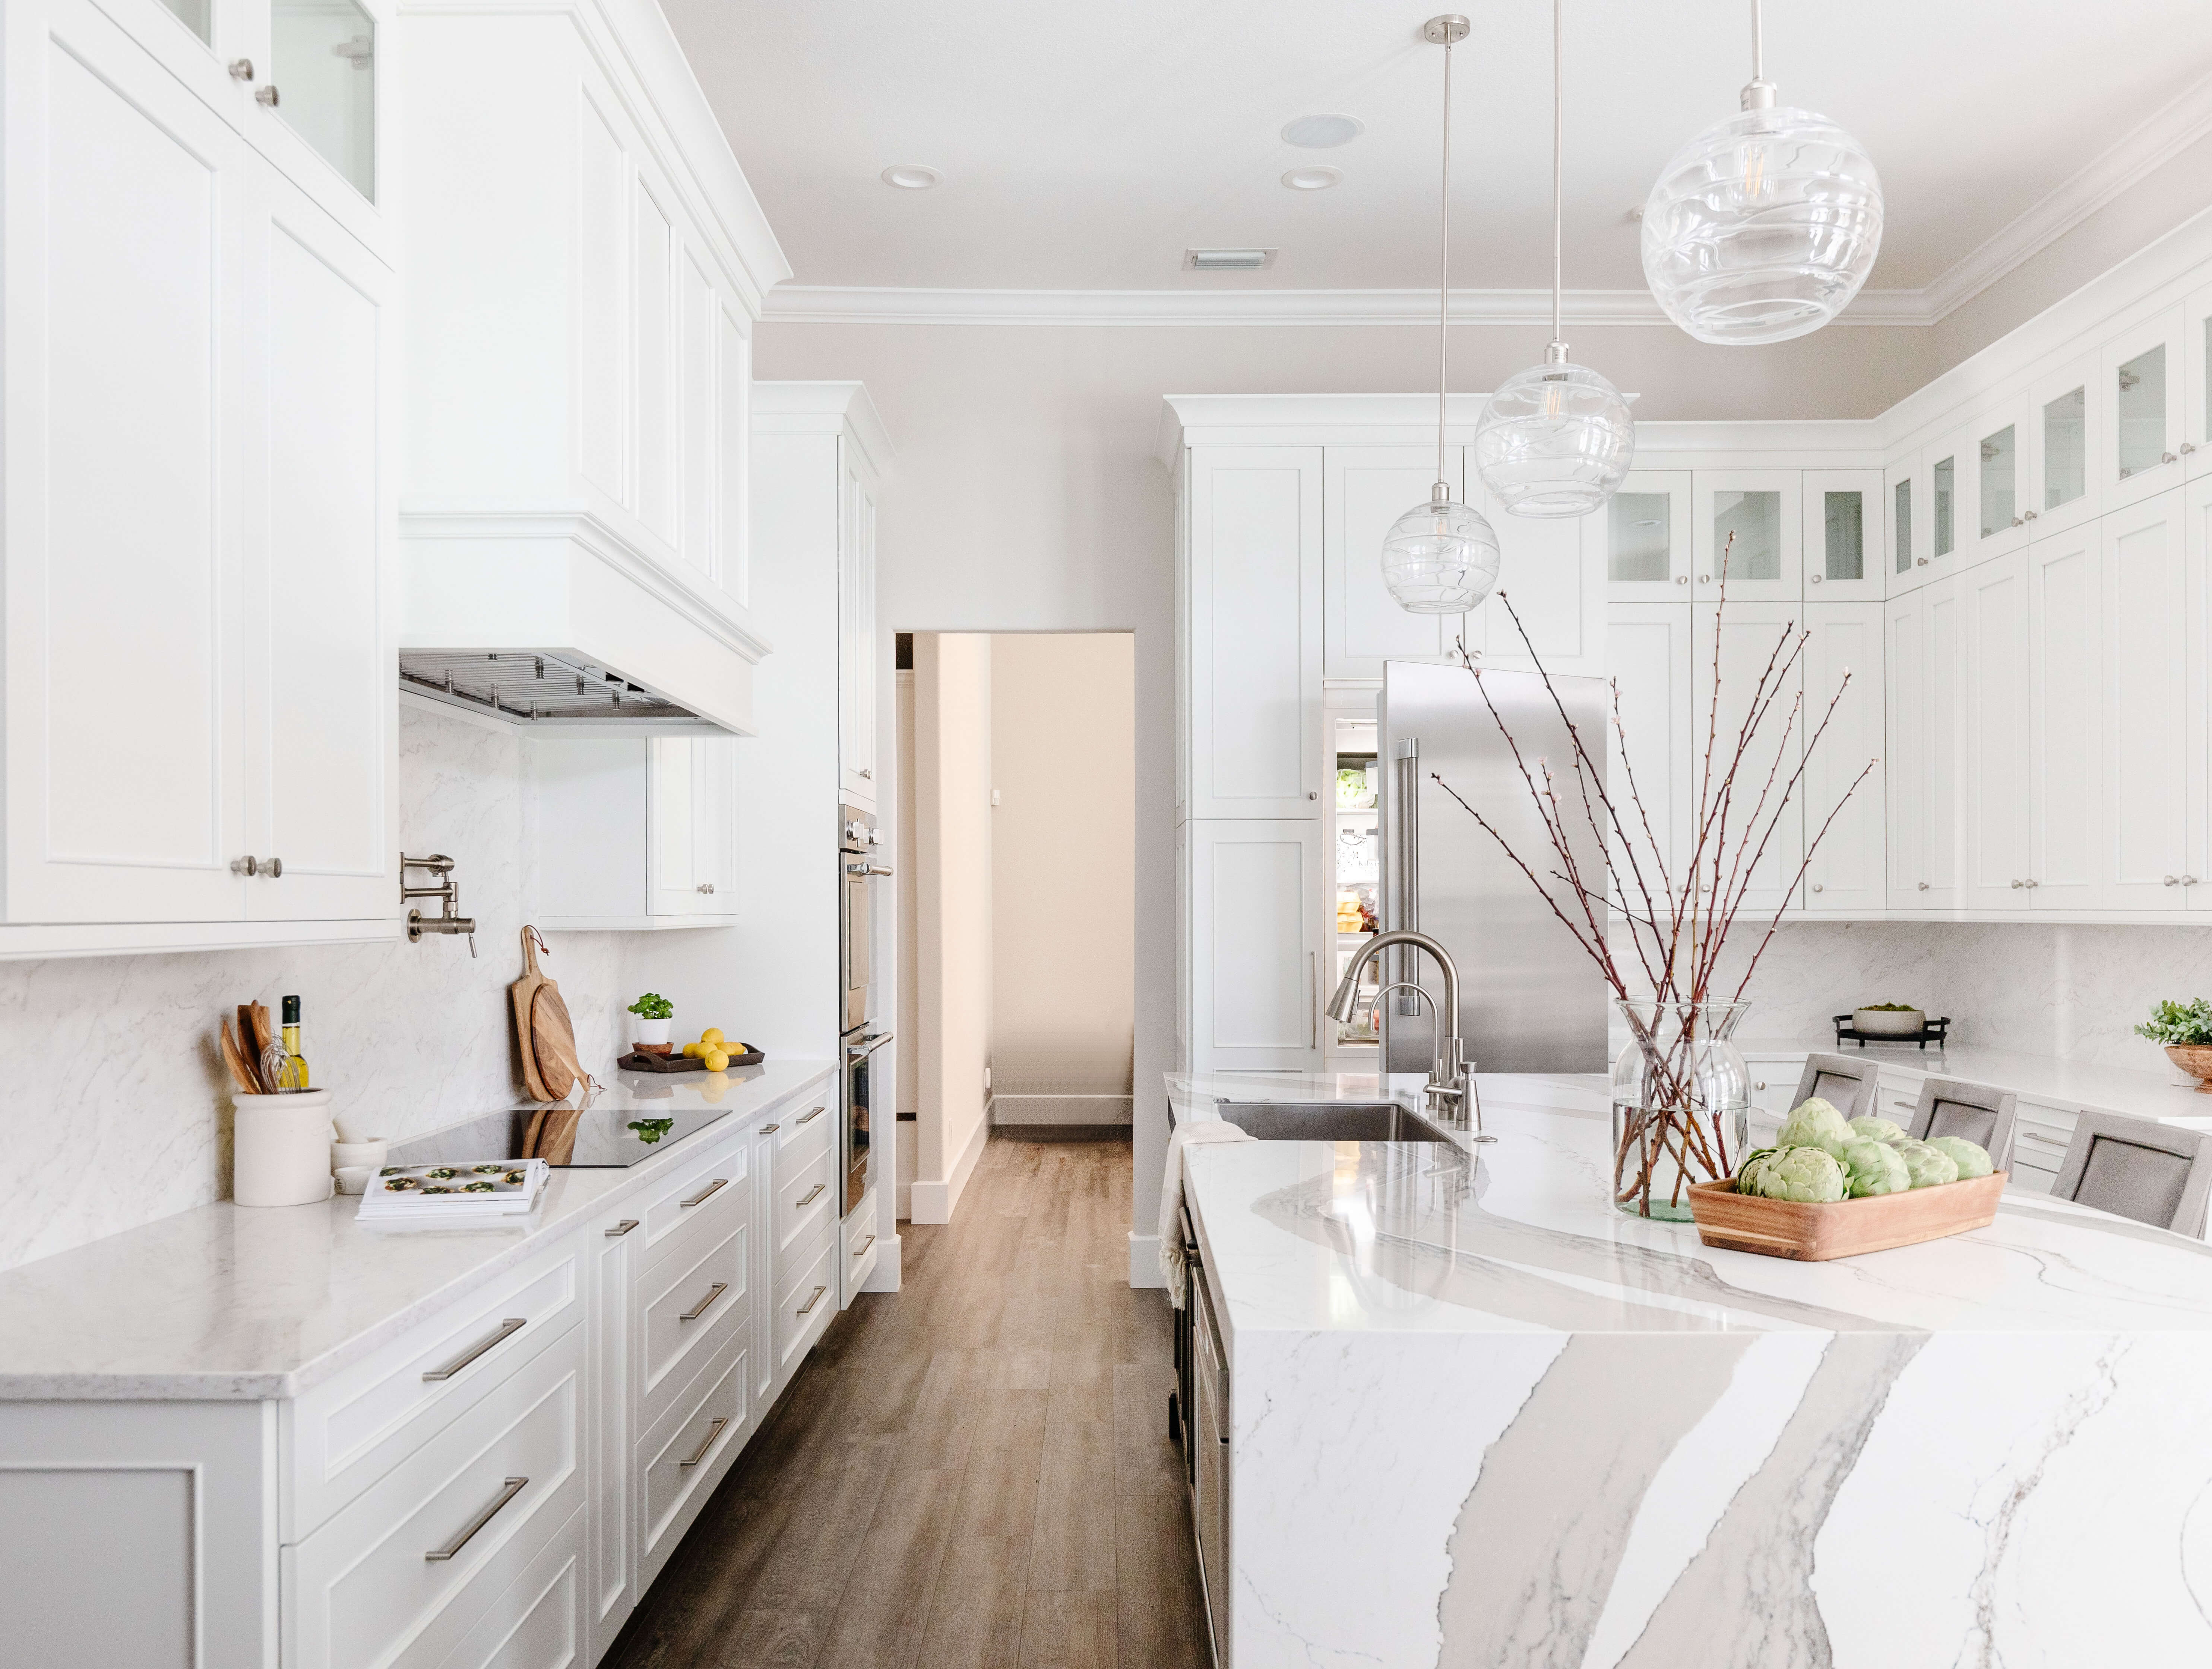 A white painted kitchen with a knotty alder kitchen island and quartz countertops. A white painted wood hood makes a beautiful focal point above the cooktop.